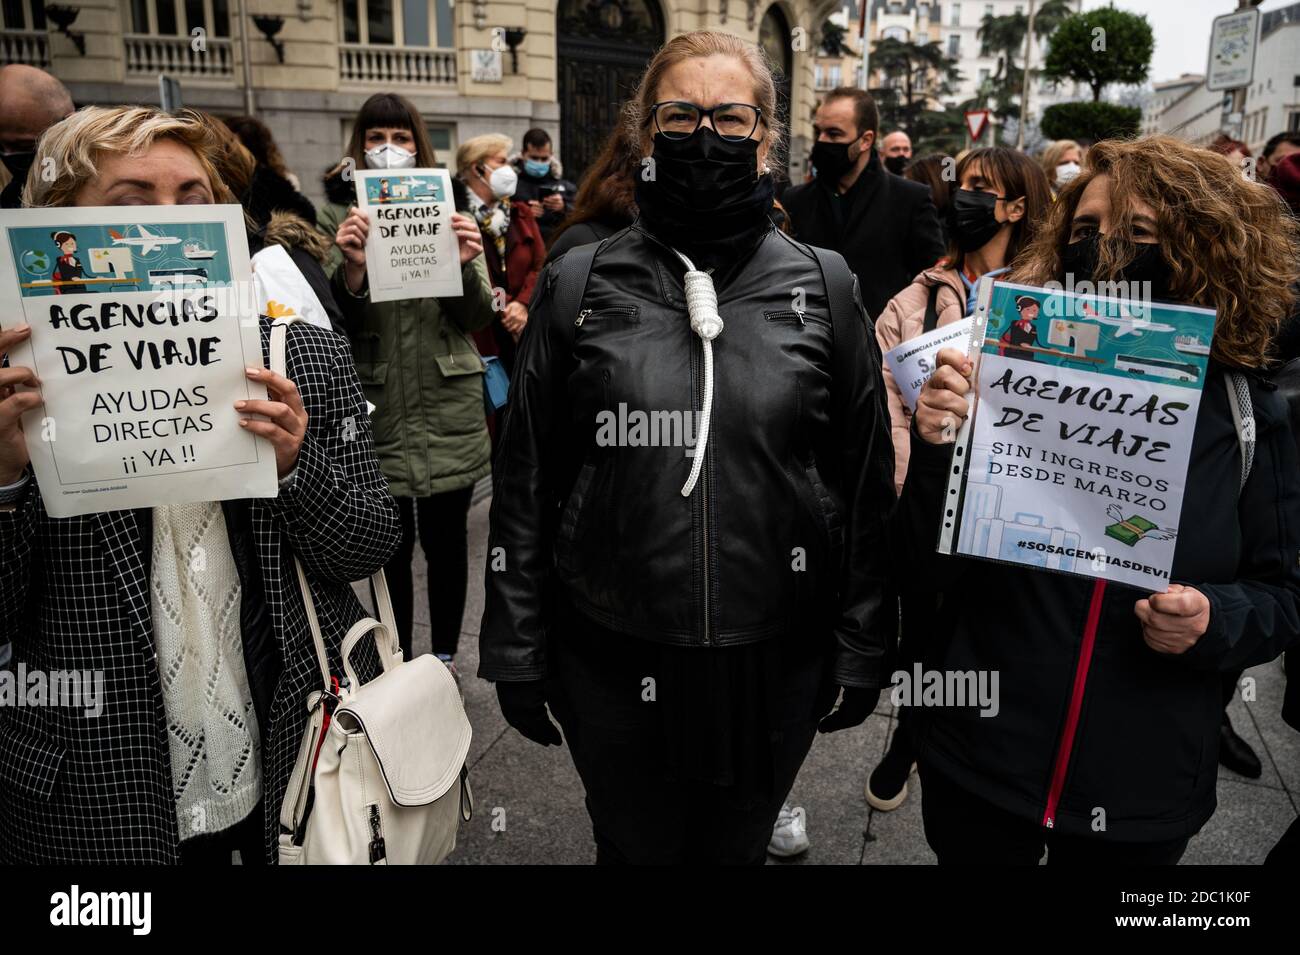 Madrid, Spain. 18th Nov, 2020. People protesting in front of the Spanish Parliament to demand urgent aid for travel agencies and tour operators, a sector that has been hit hard by the coronavirus (COVID-19) pandemic as tourism is closed. Credit: Marcos del Mazo/Alamy Live News Stock Photo